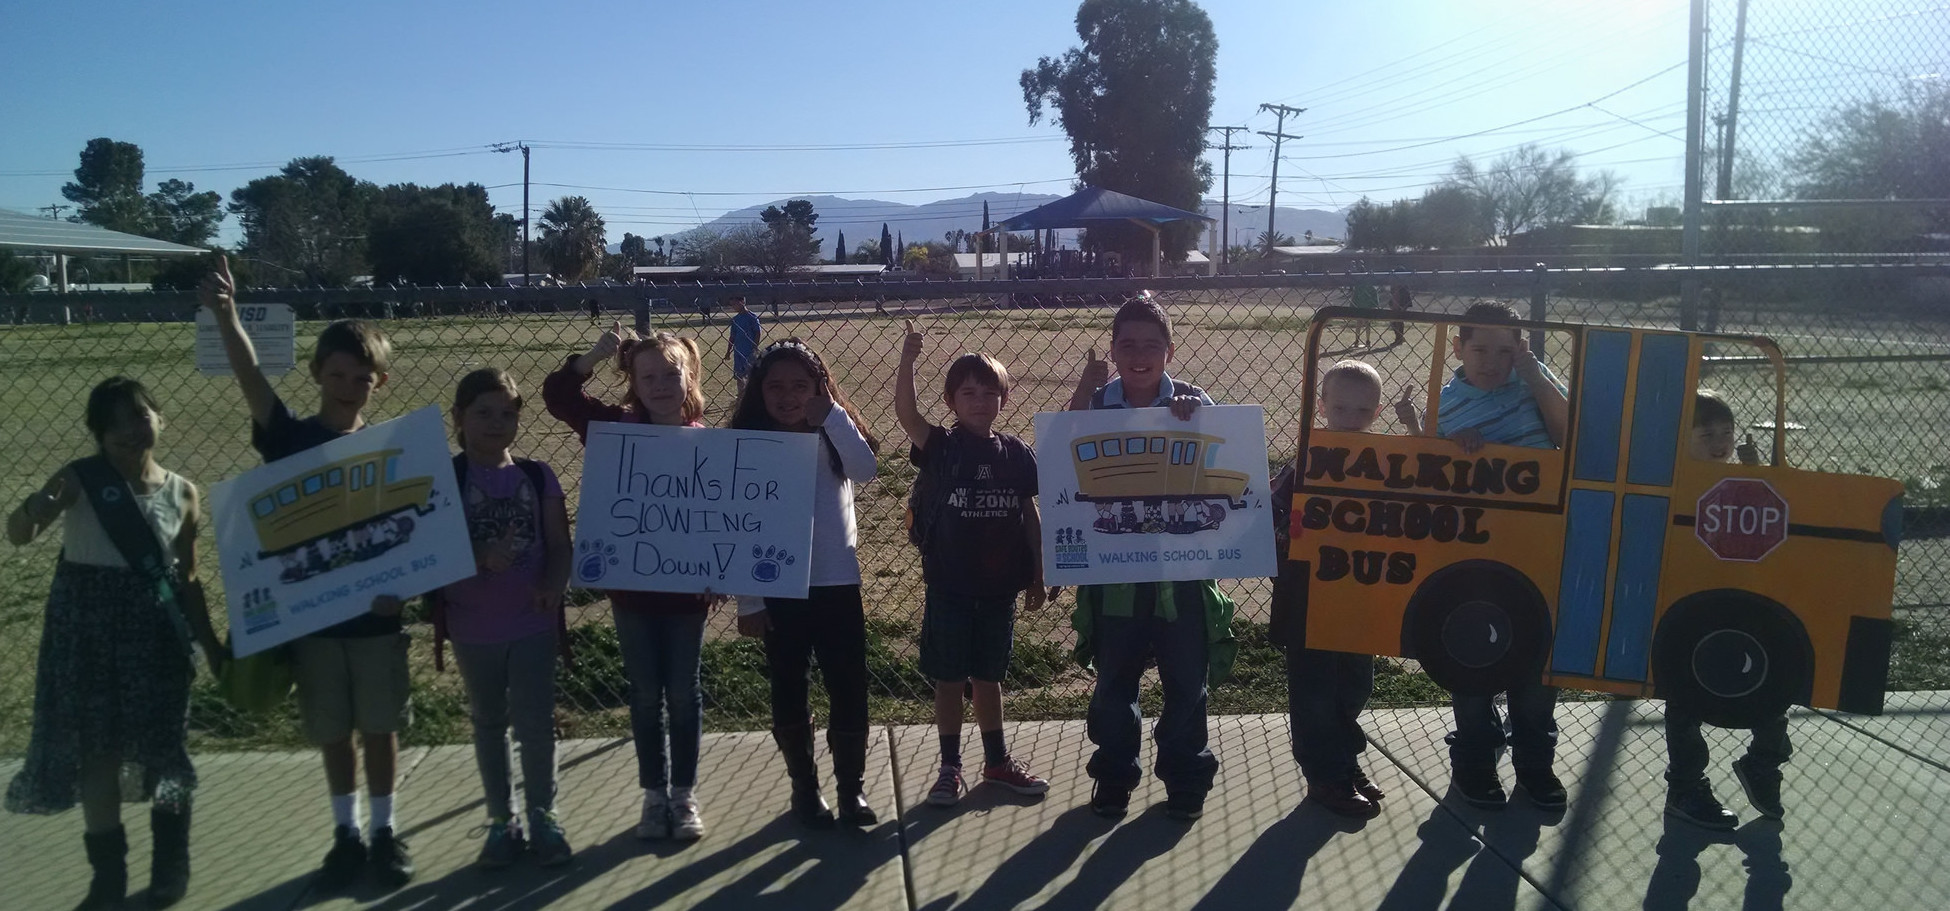 Kids part of the WSB program pose with their signs. Photo by Safe Routes Tucson.